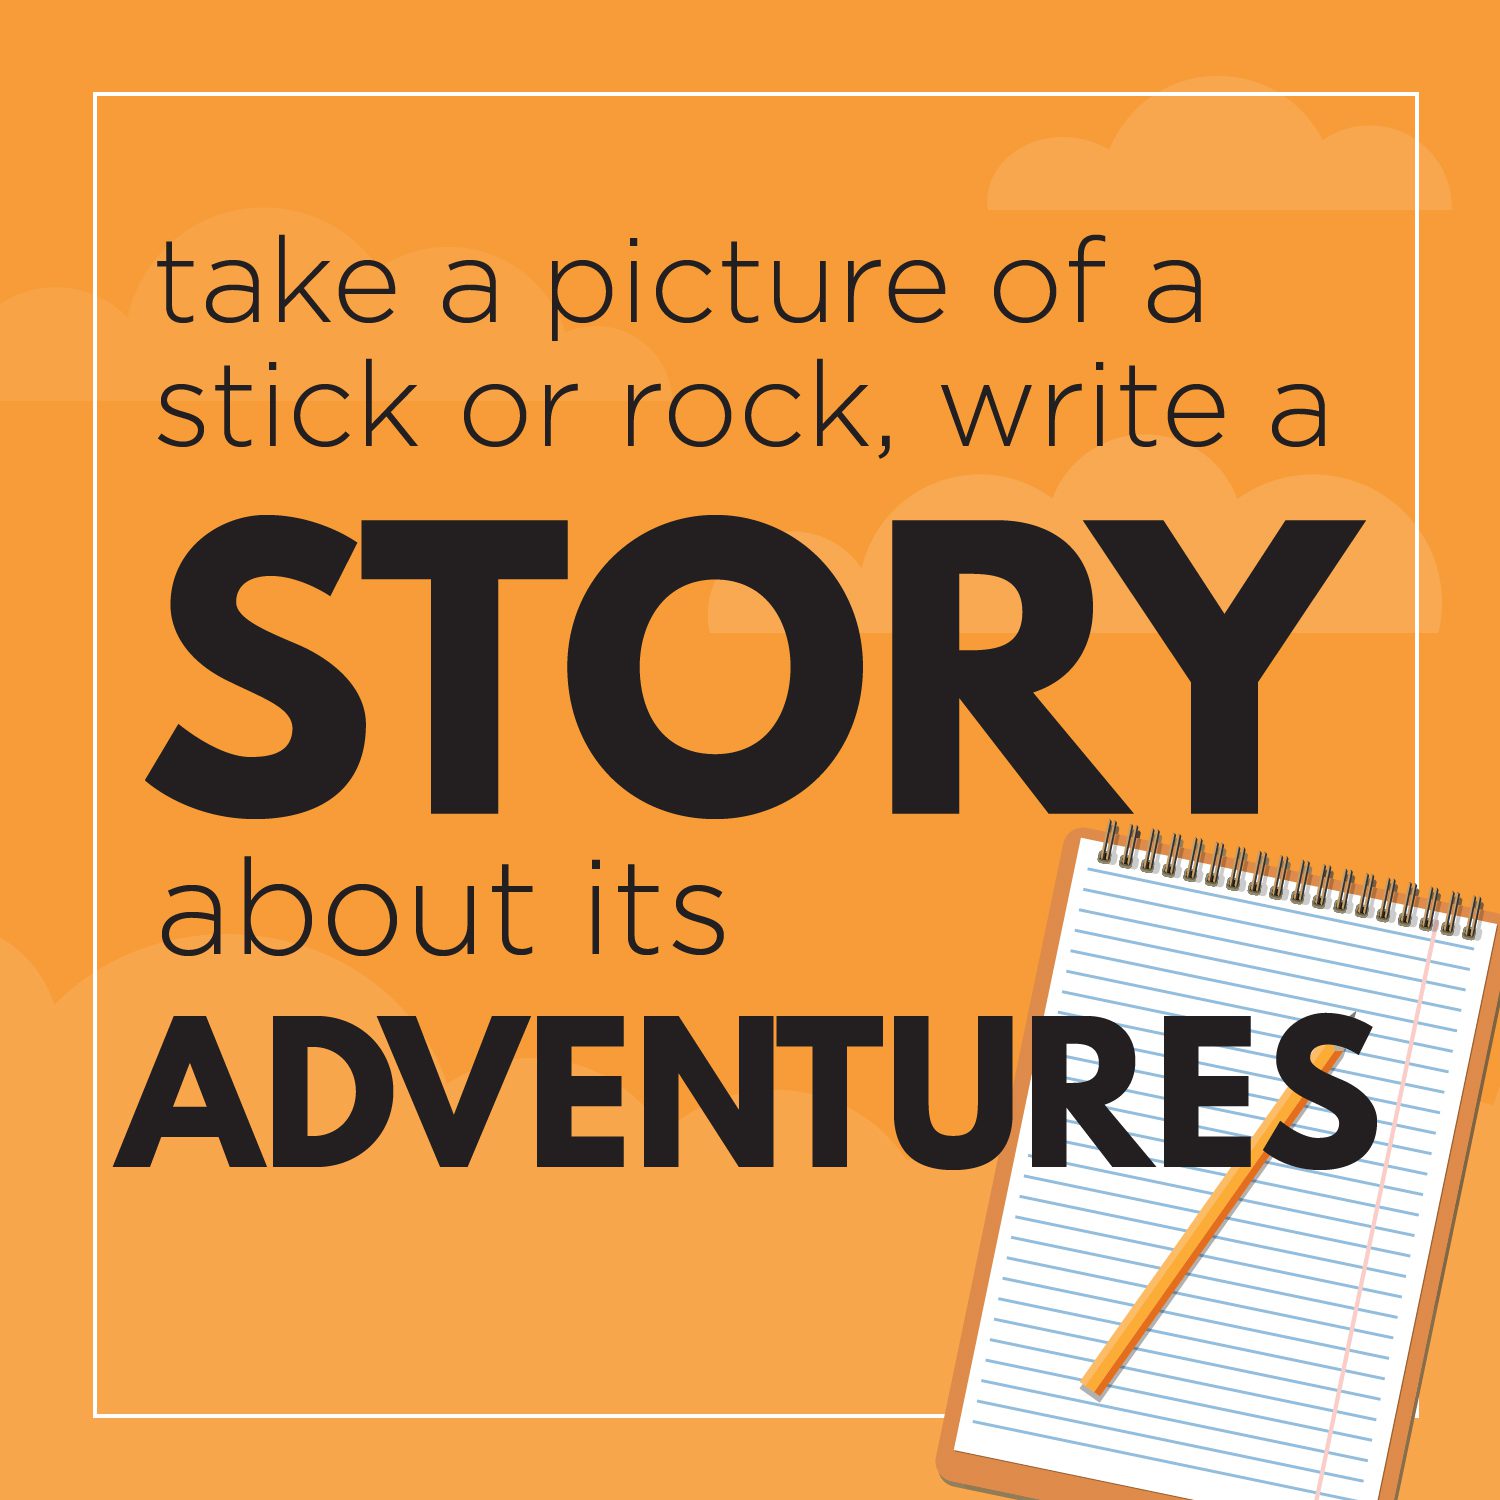 Take a picture of a stick or rock, write a story about its adventures